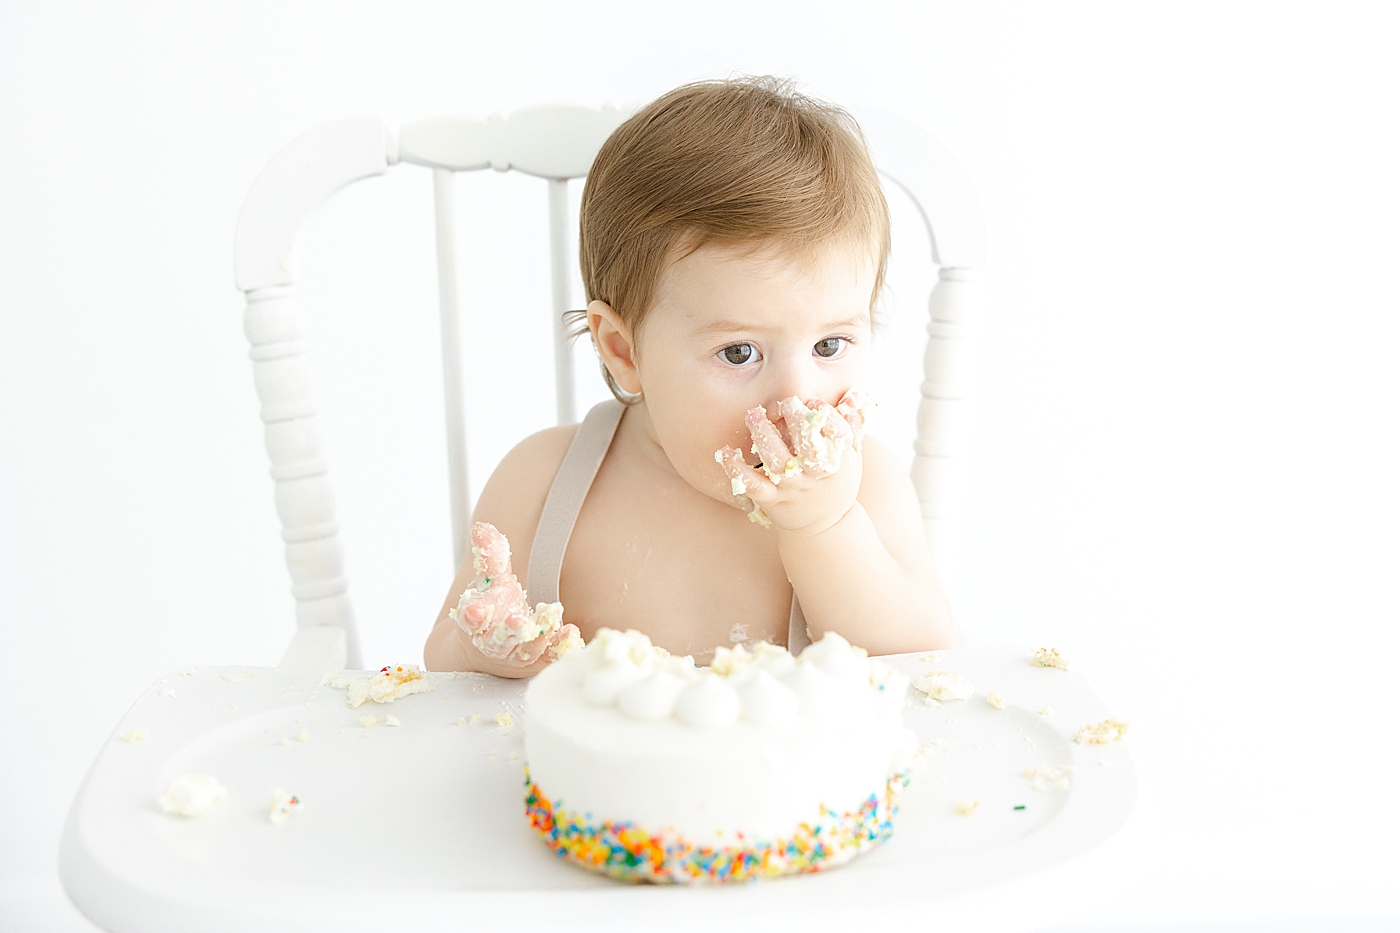 during his cake smash session | Image by Sana Ahmed